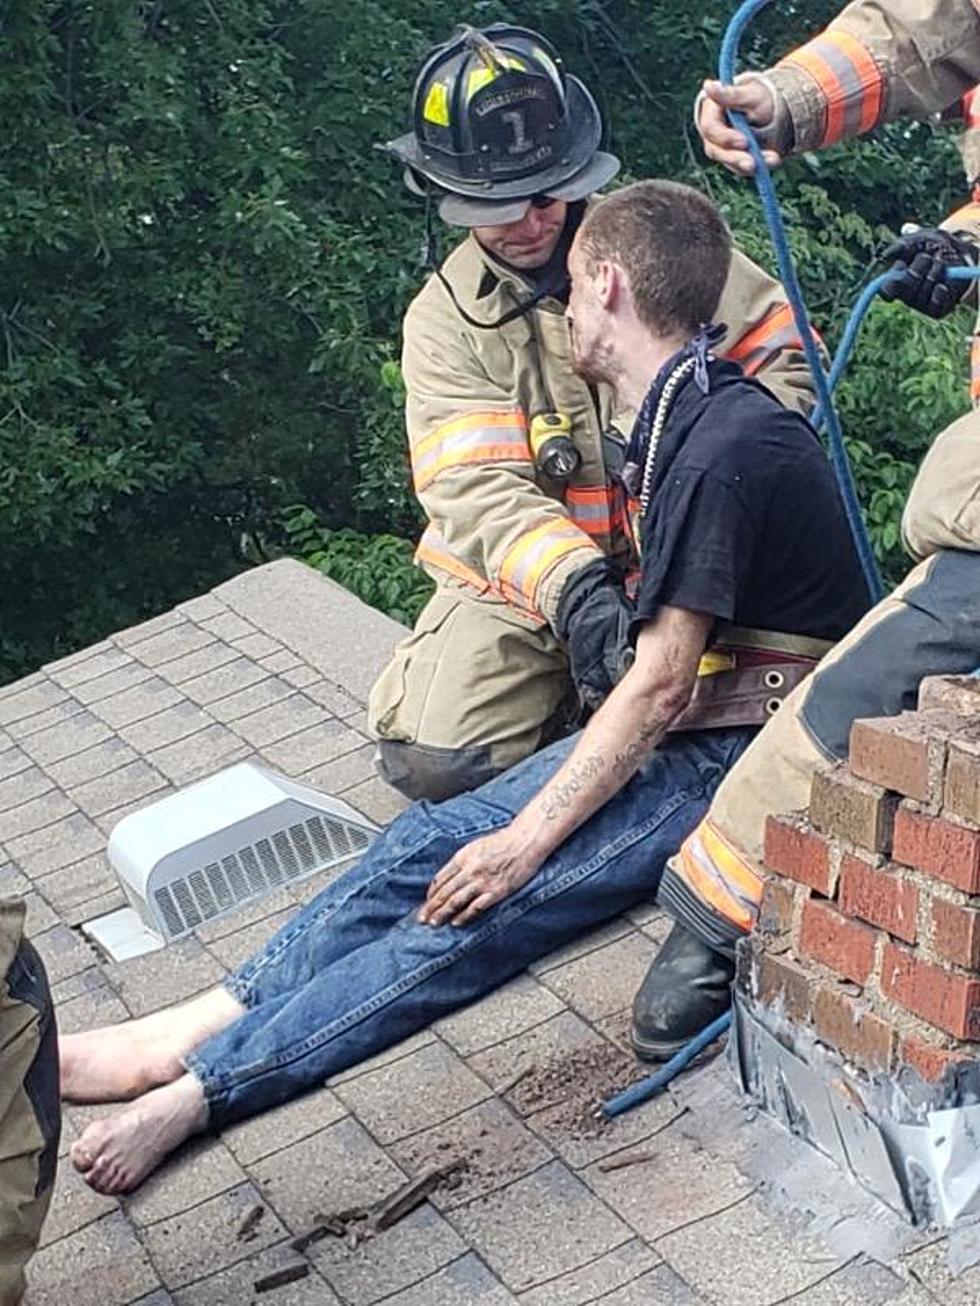 A Man Wanted By VCSO Is Arrested After Getting Stuck In A Chimney